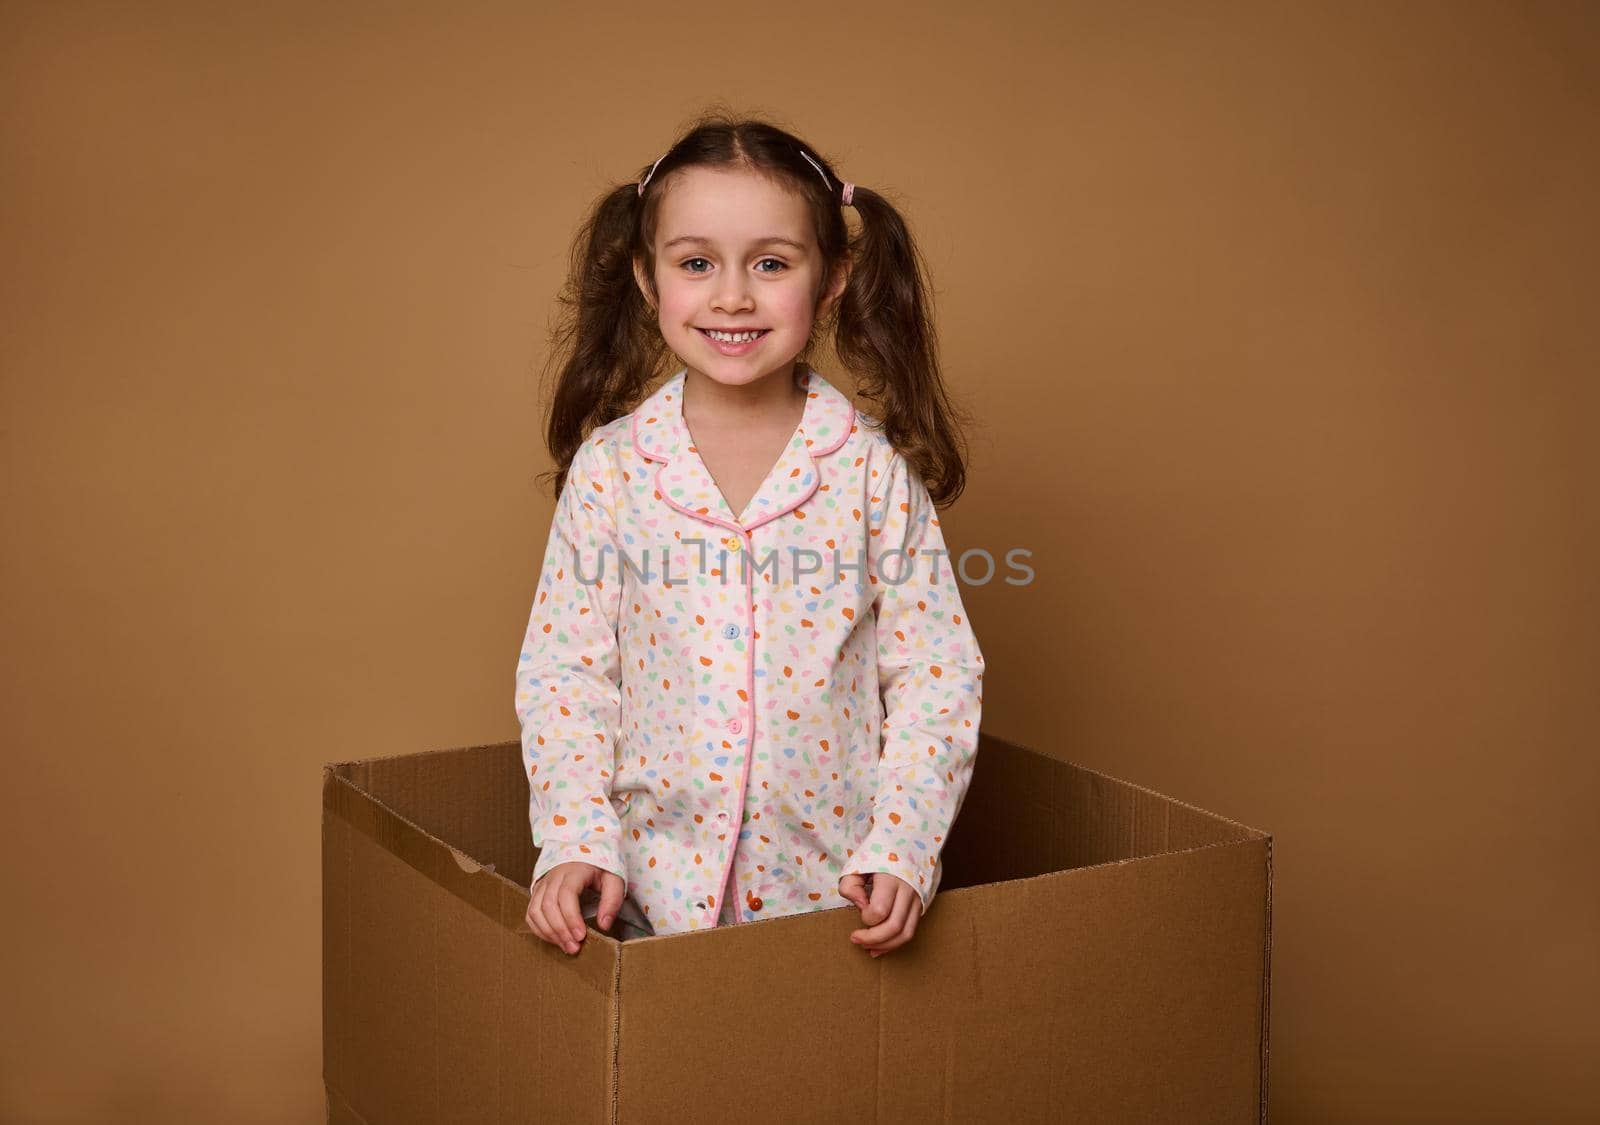 Adorable child, European 4 years old baby girl with two wavy ponytails in a bright pajamas looking at camera standing inside a cardboard box, isolated over beige background with copy space for ads